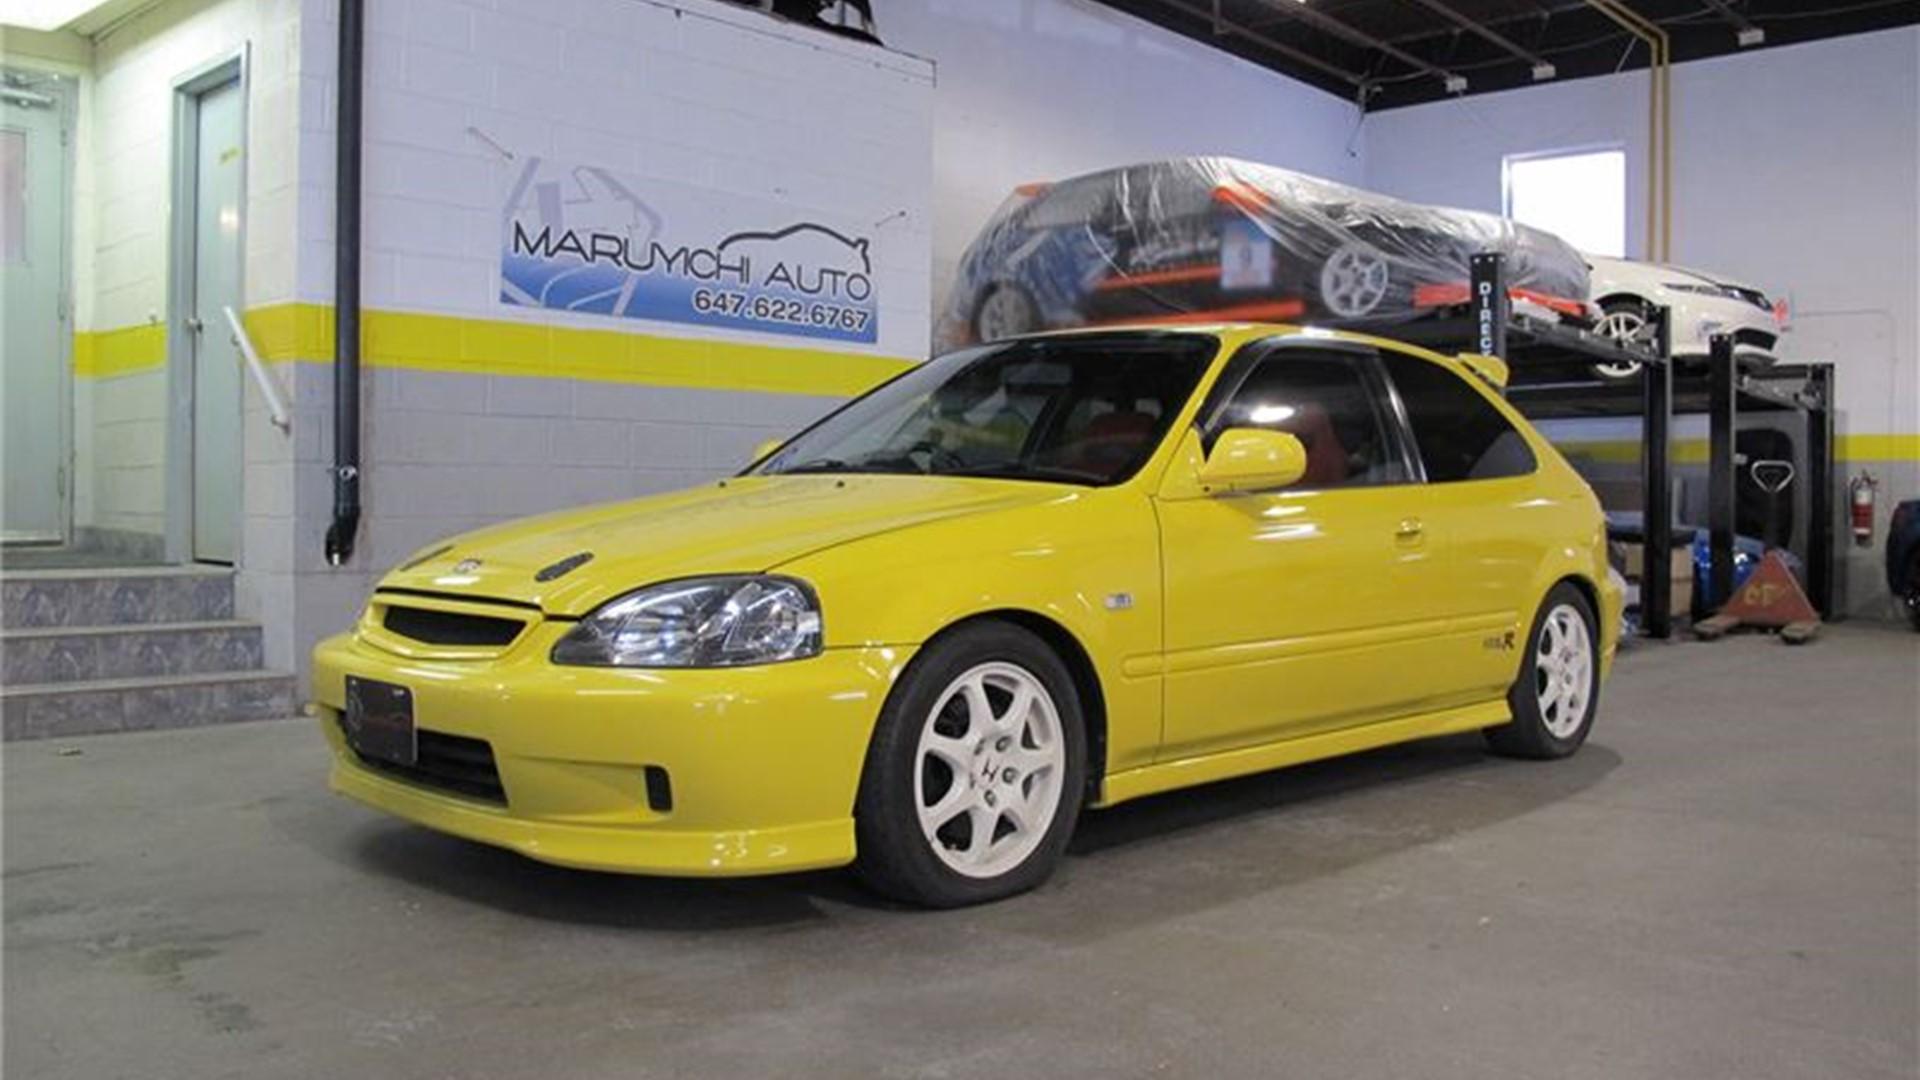 Find of the Week: 1999 Honda Civic Type R